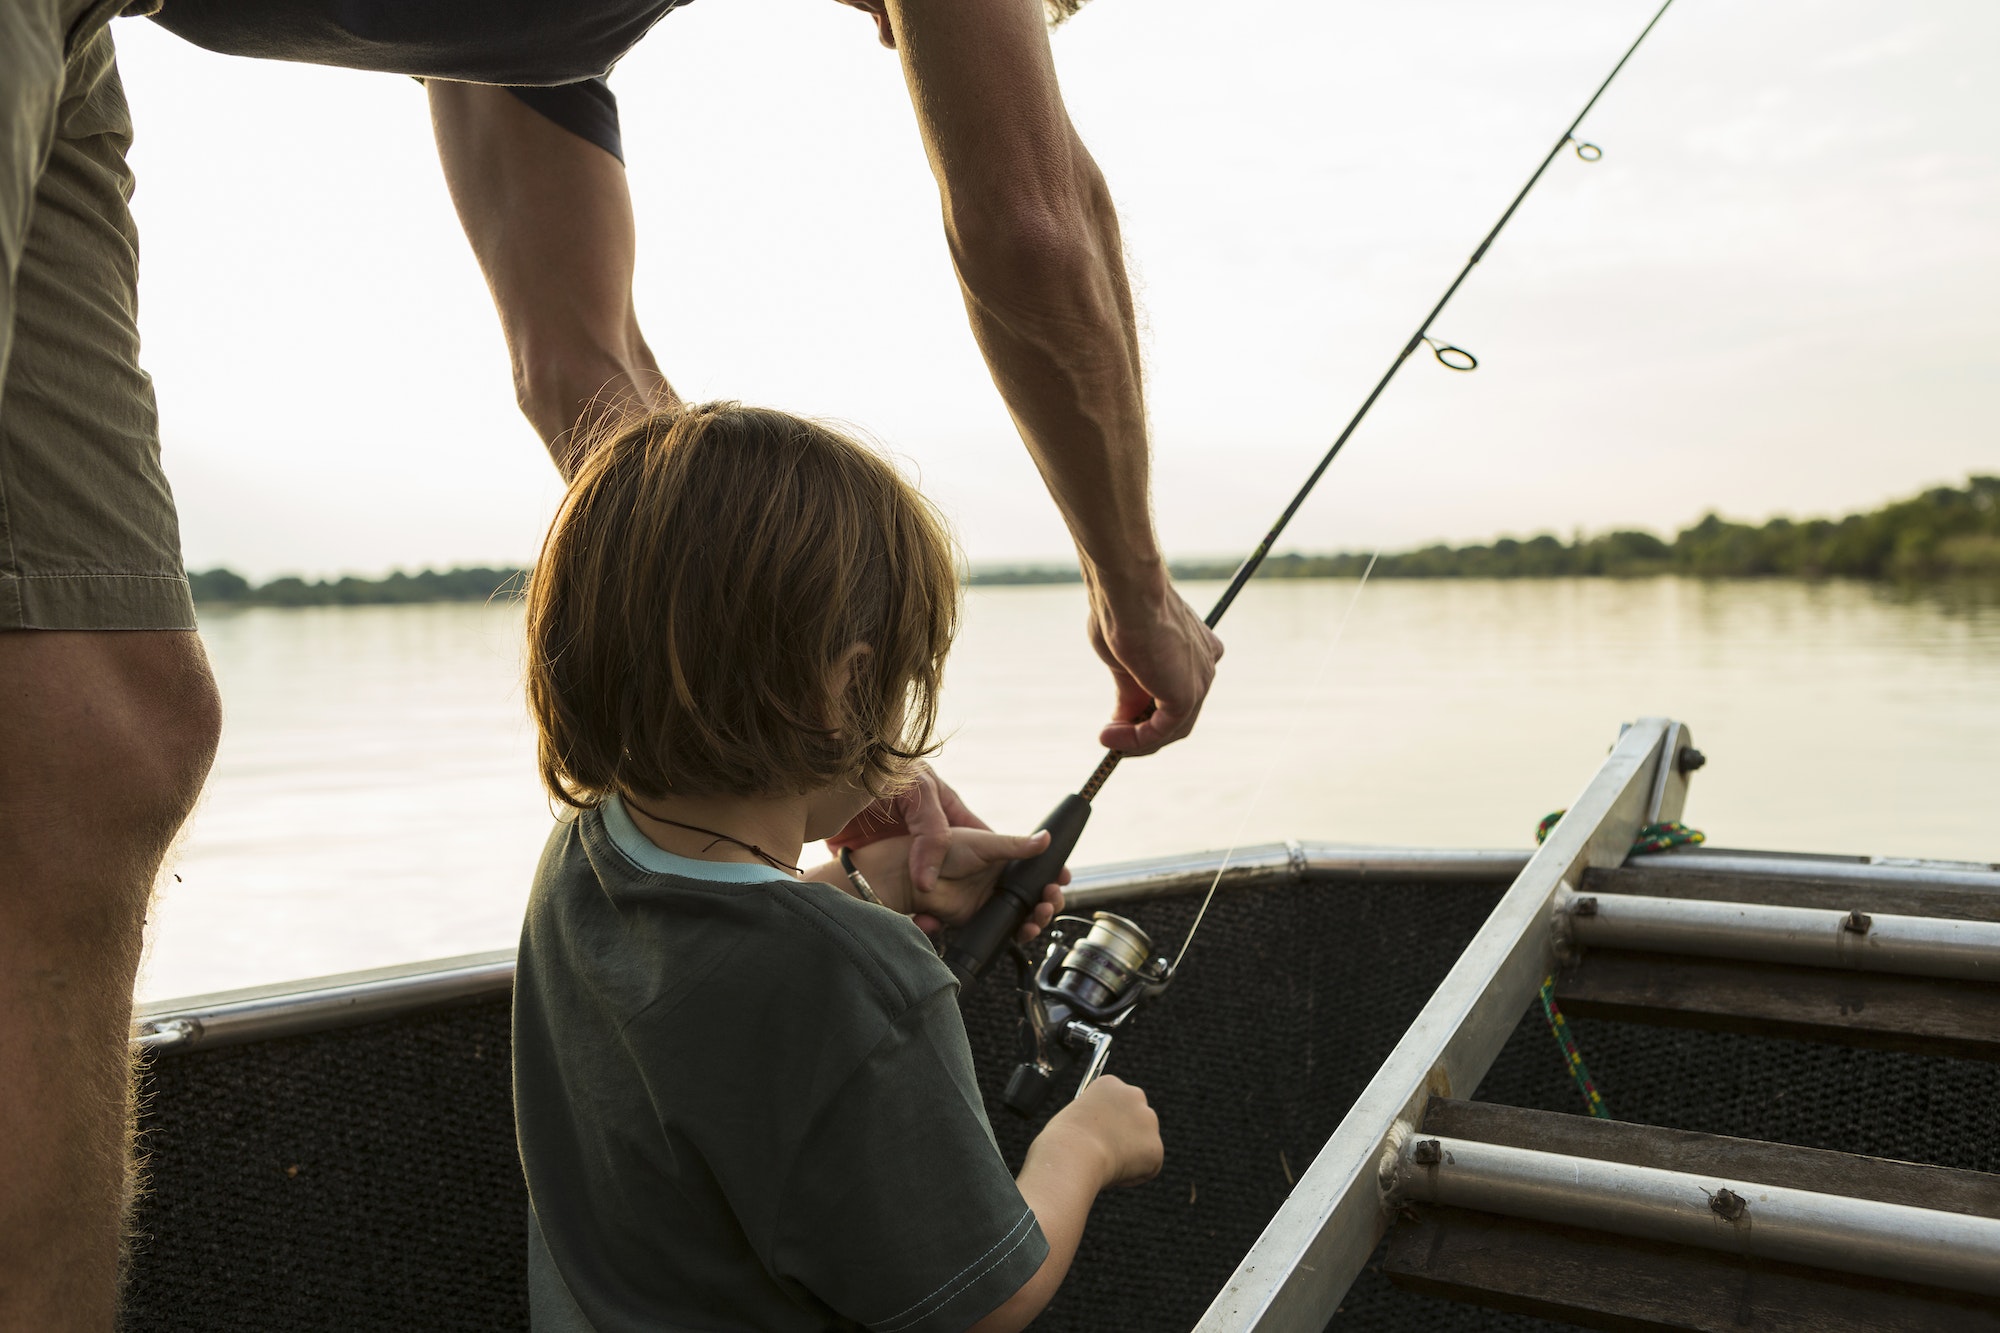 A five-year-old boy fishing from a boat